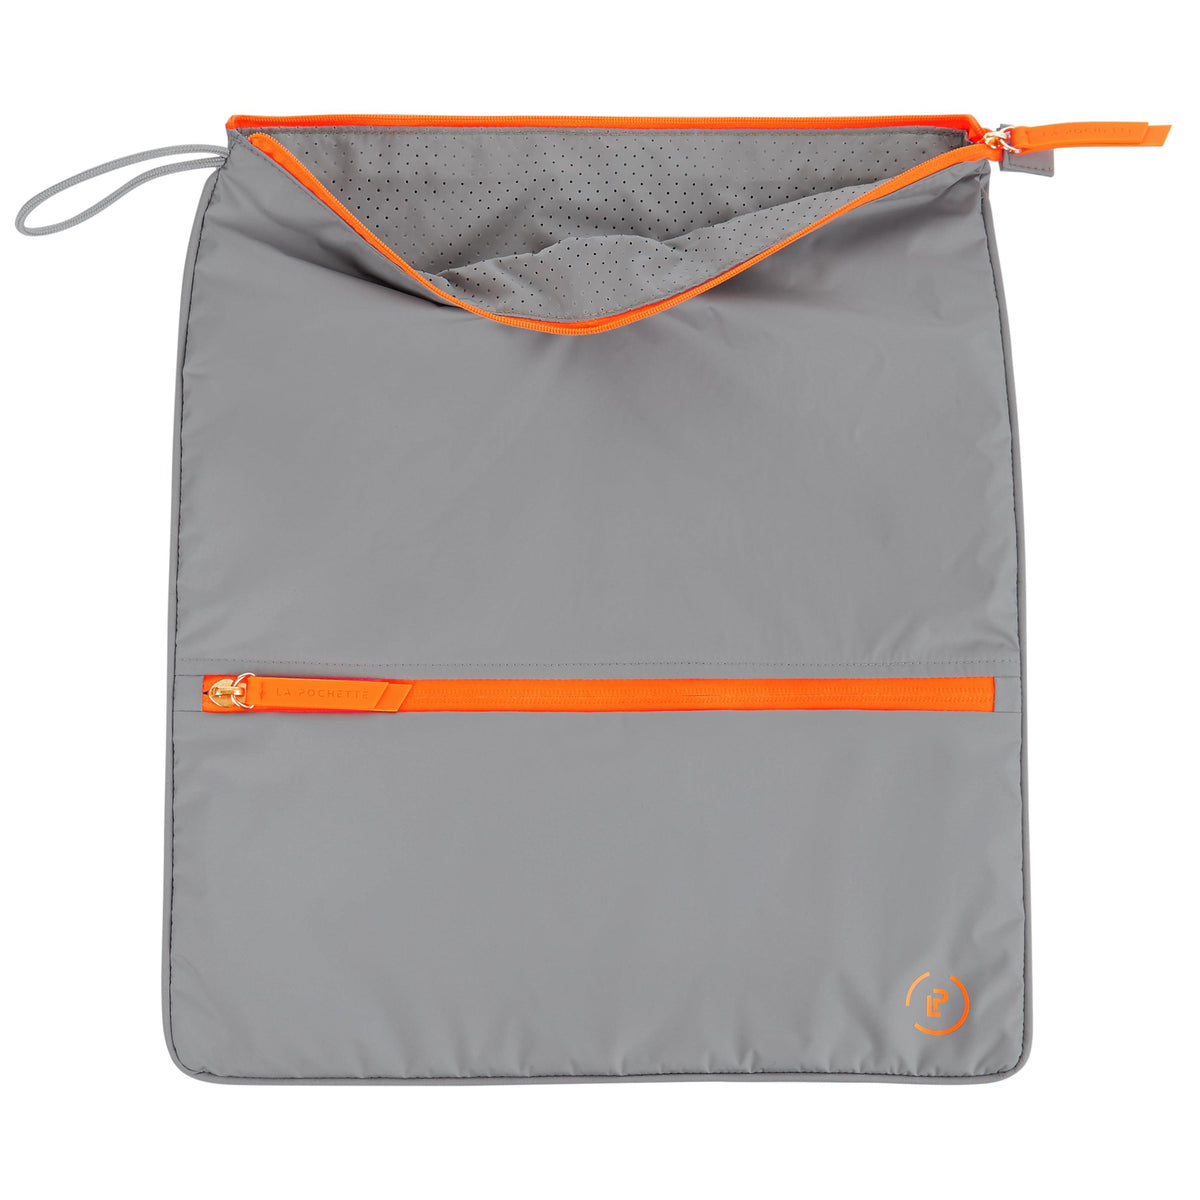 Shadow Neon Orange Sweat Bag lying flat, showing unzipped top to reveal inner perforated grey lining